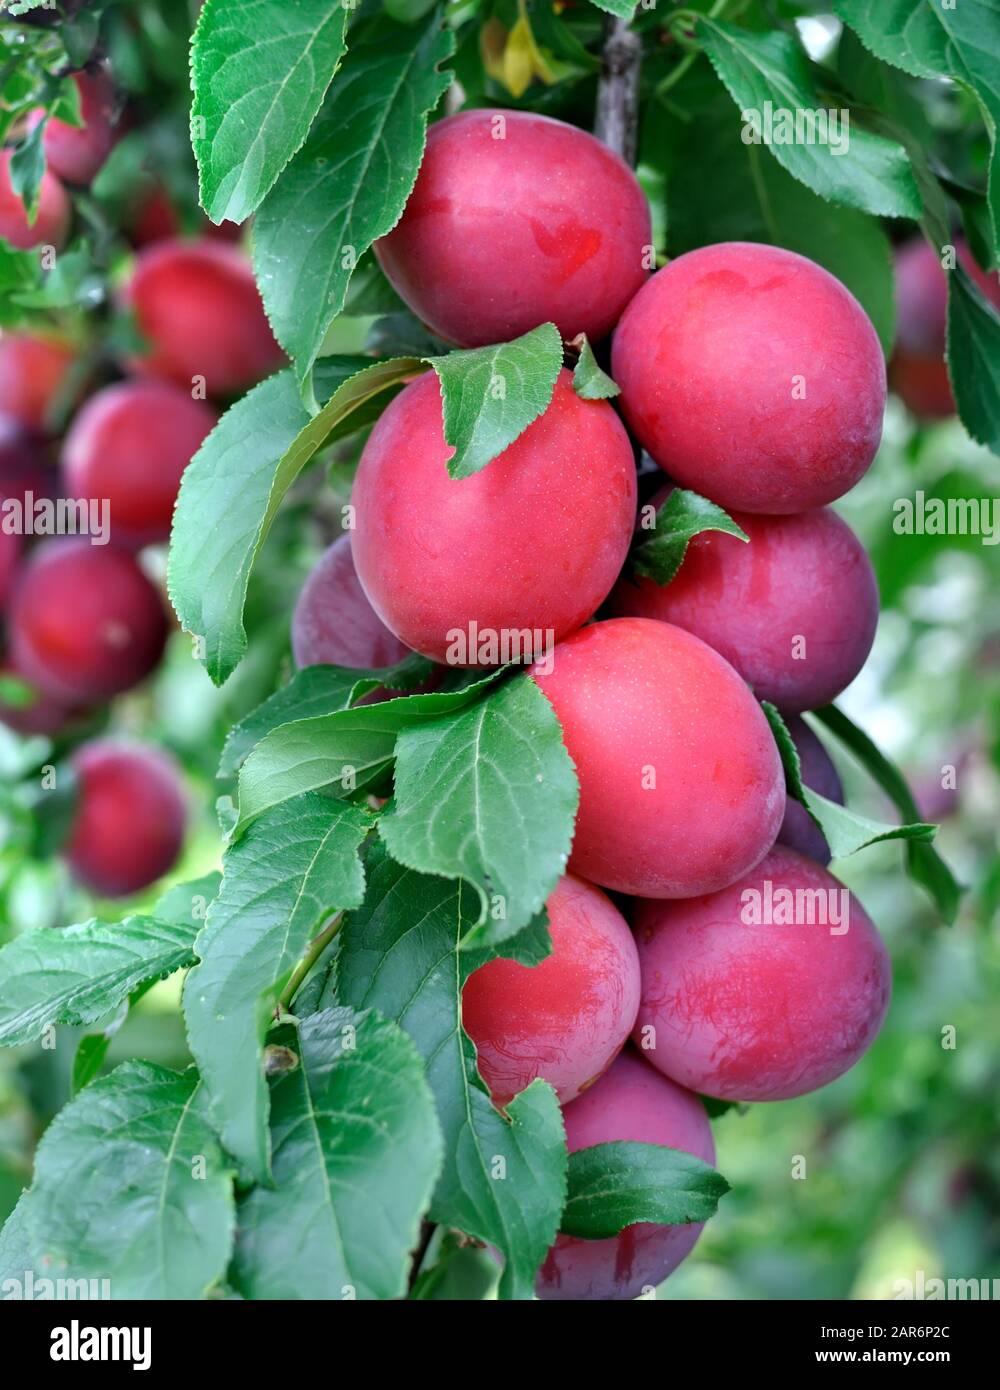 close-up of ripe plums on a tree branch in the orchard, vertical composition Stock Photo